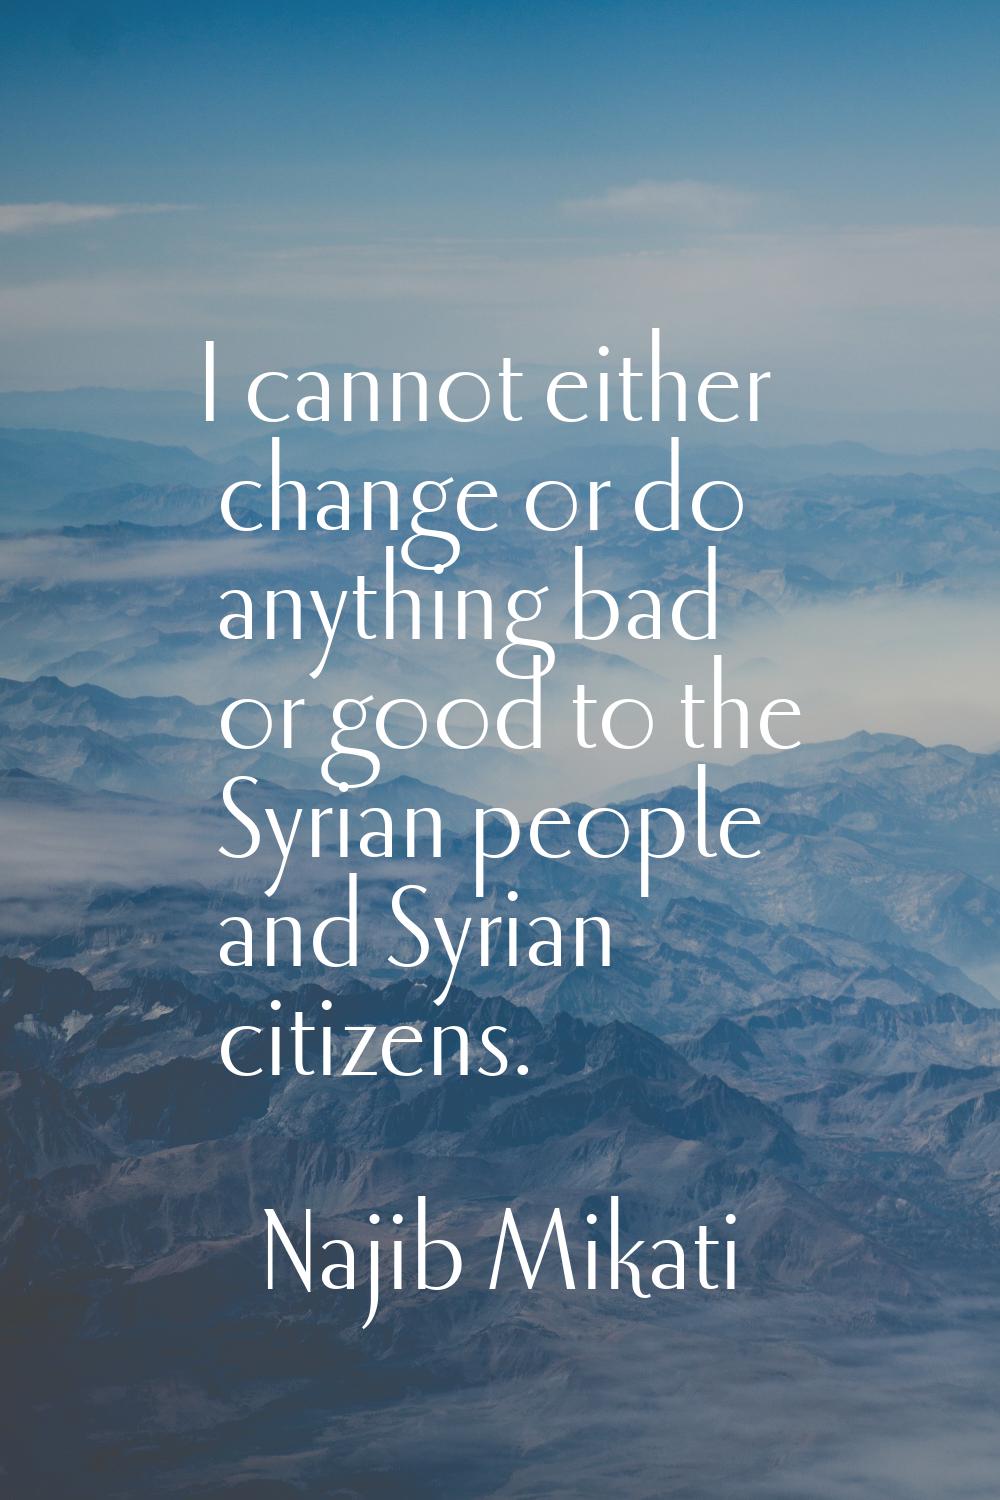 I cannot either change or do anything bad or good to the Syrian people and Syrian citizens.